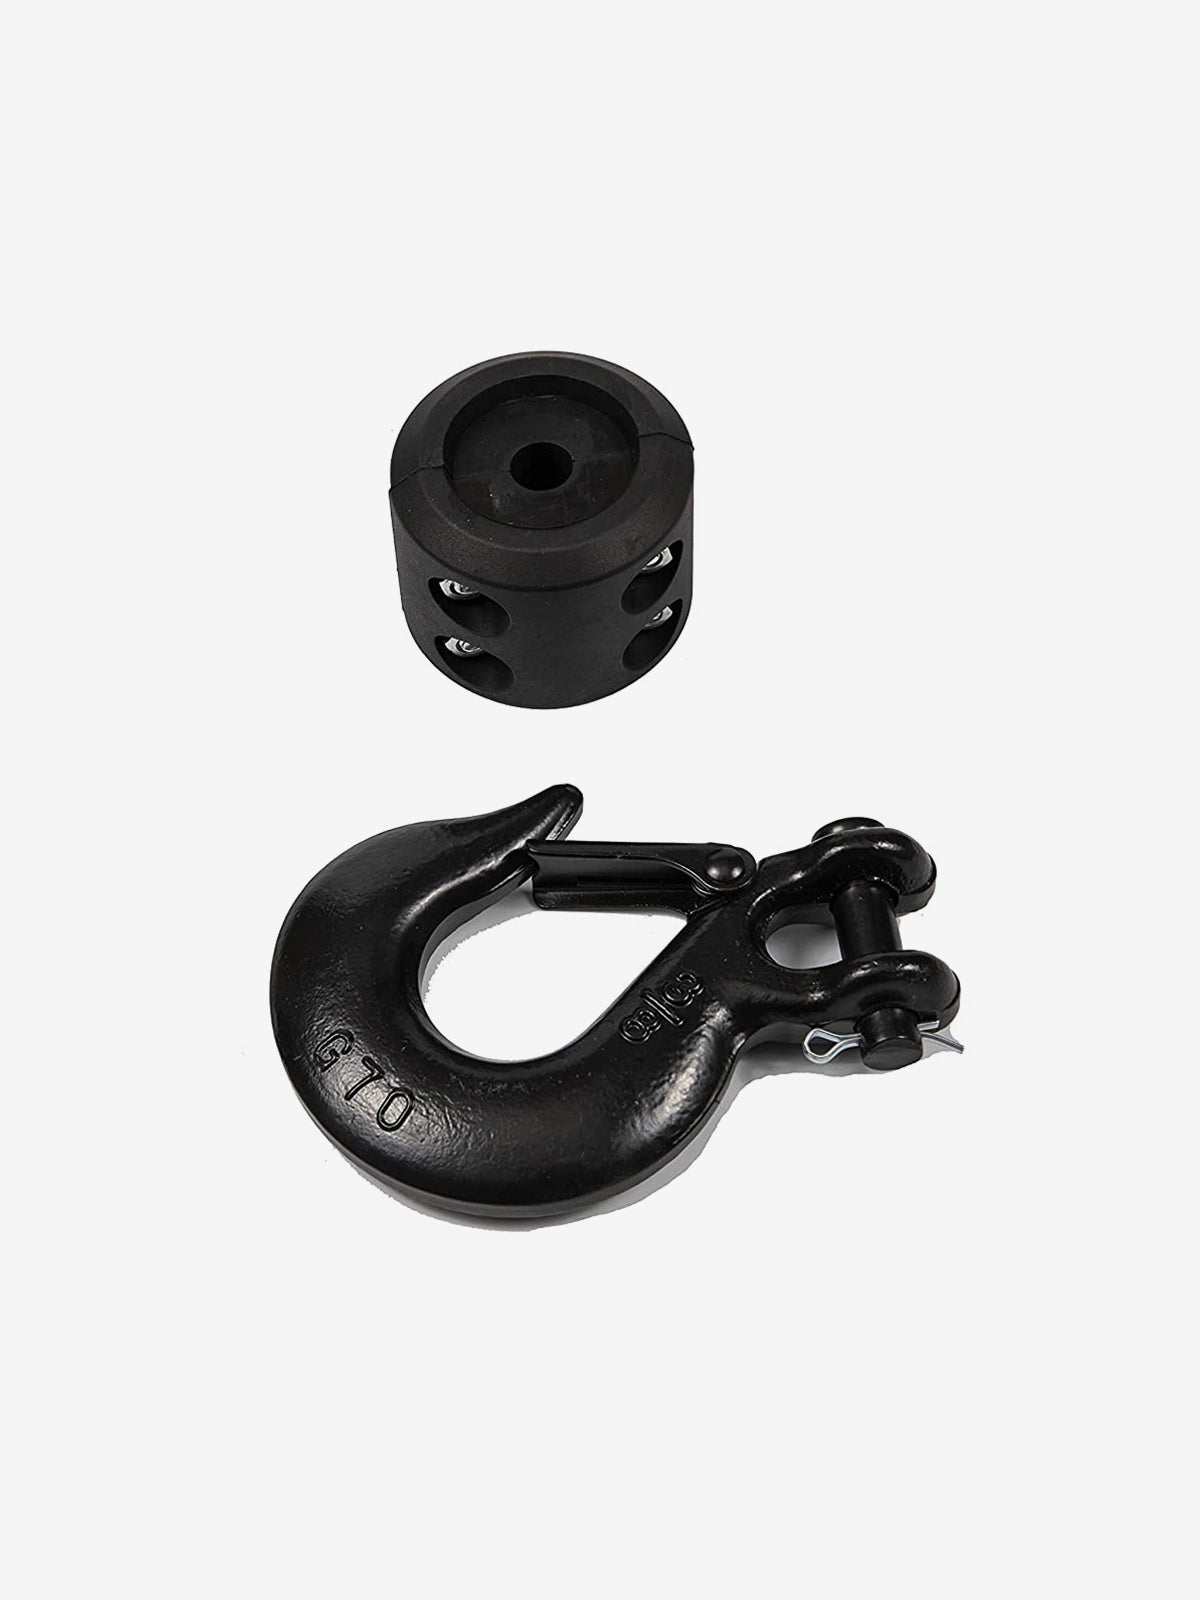 Winch Cable Hook with Stopper Sets, Winch Cable Hook (Black)